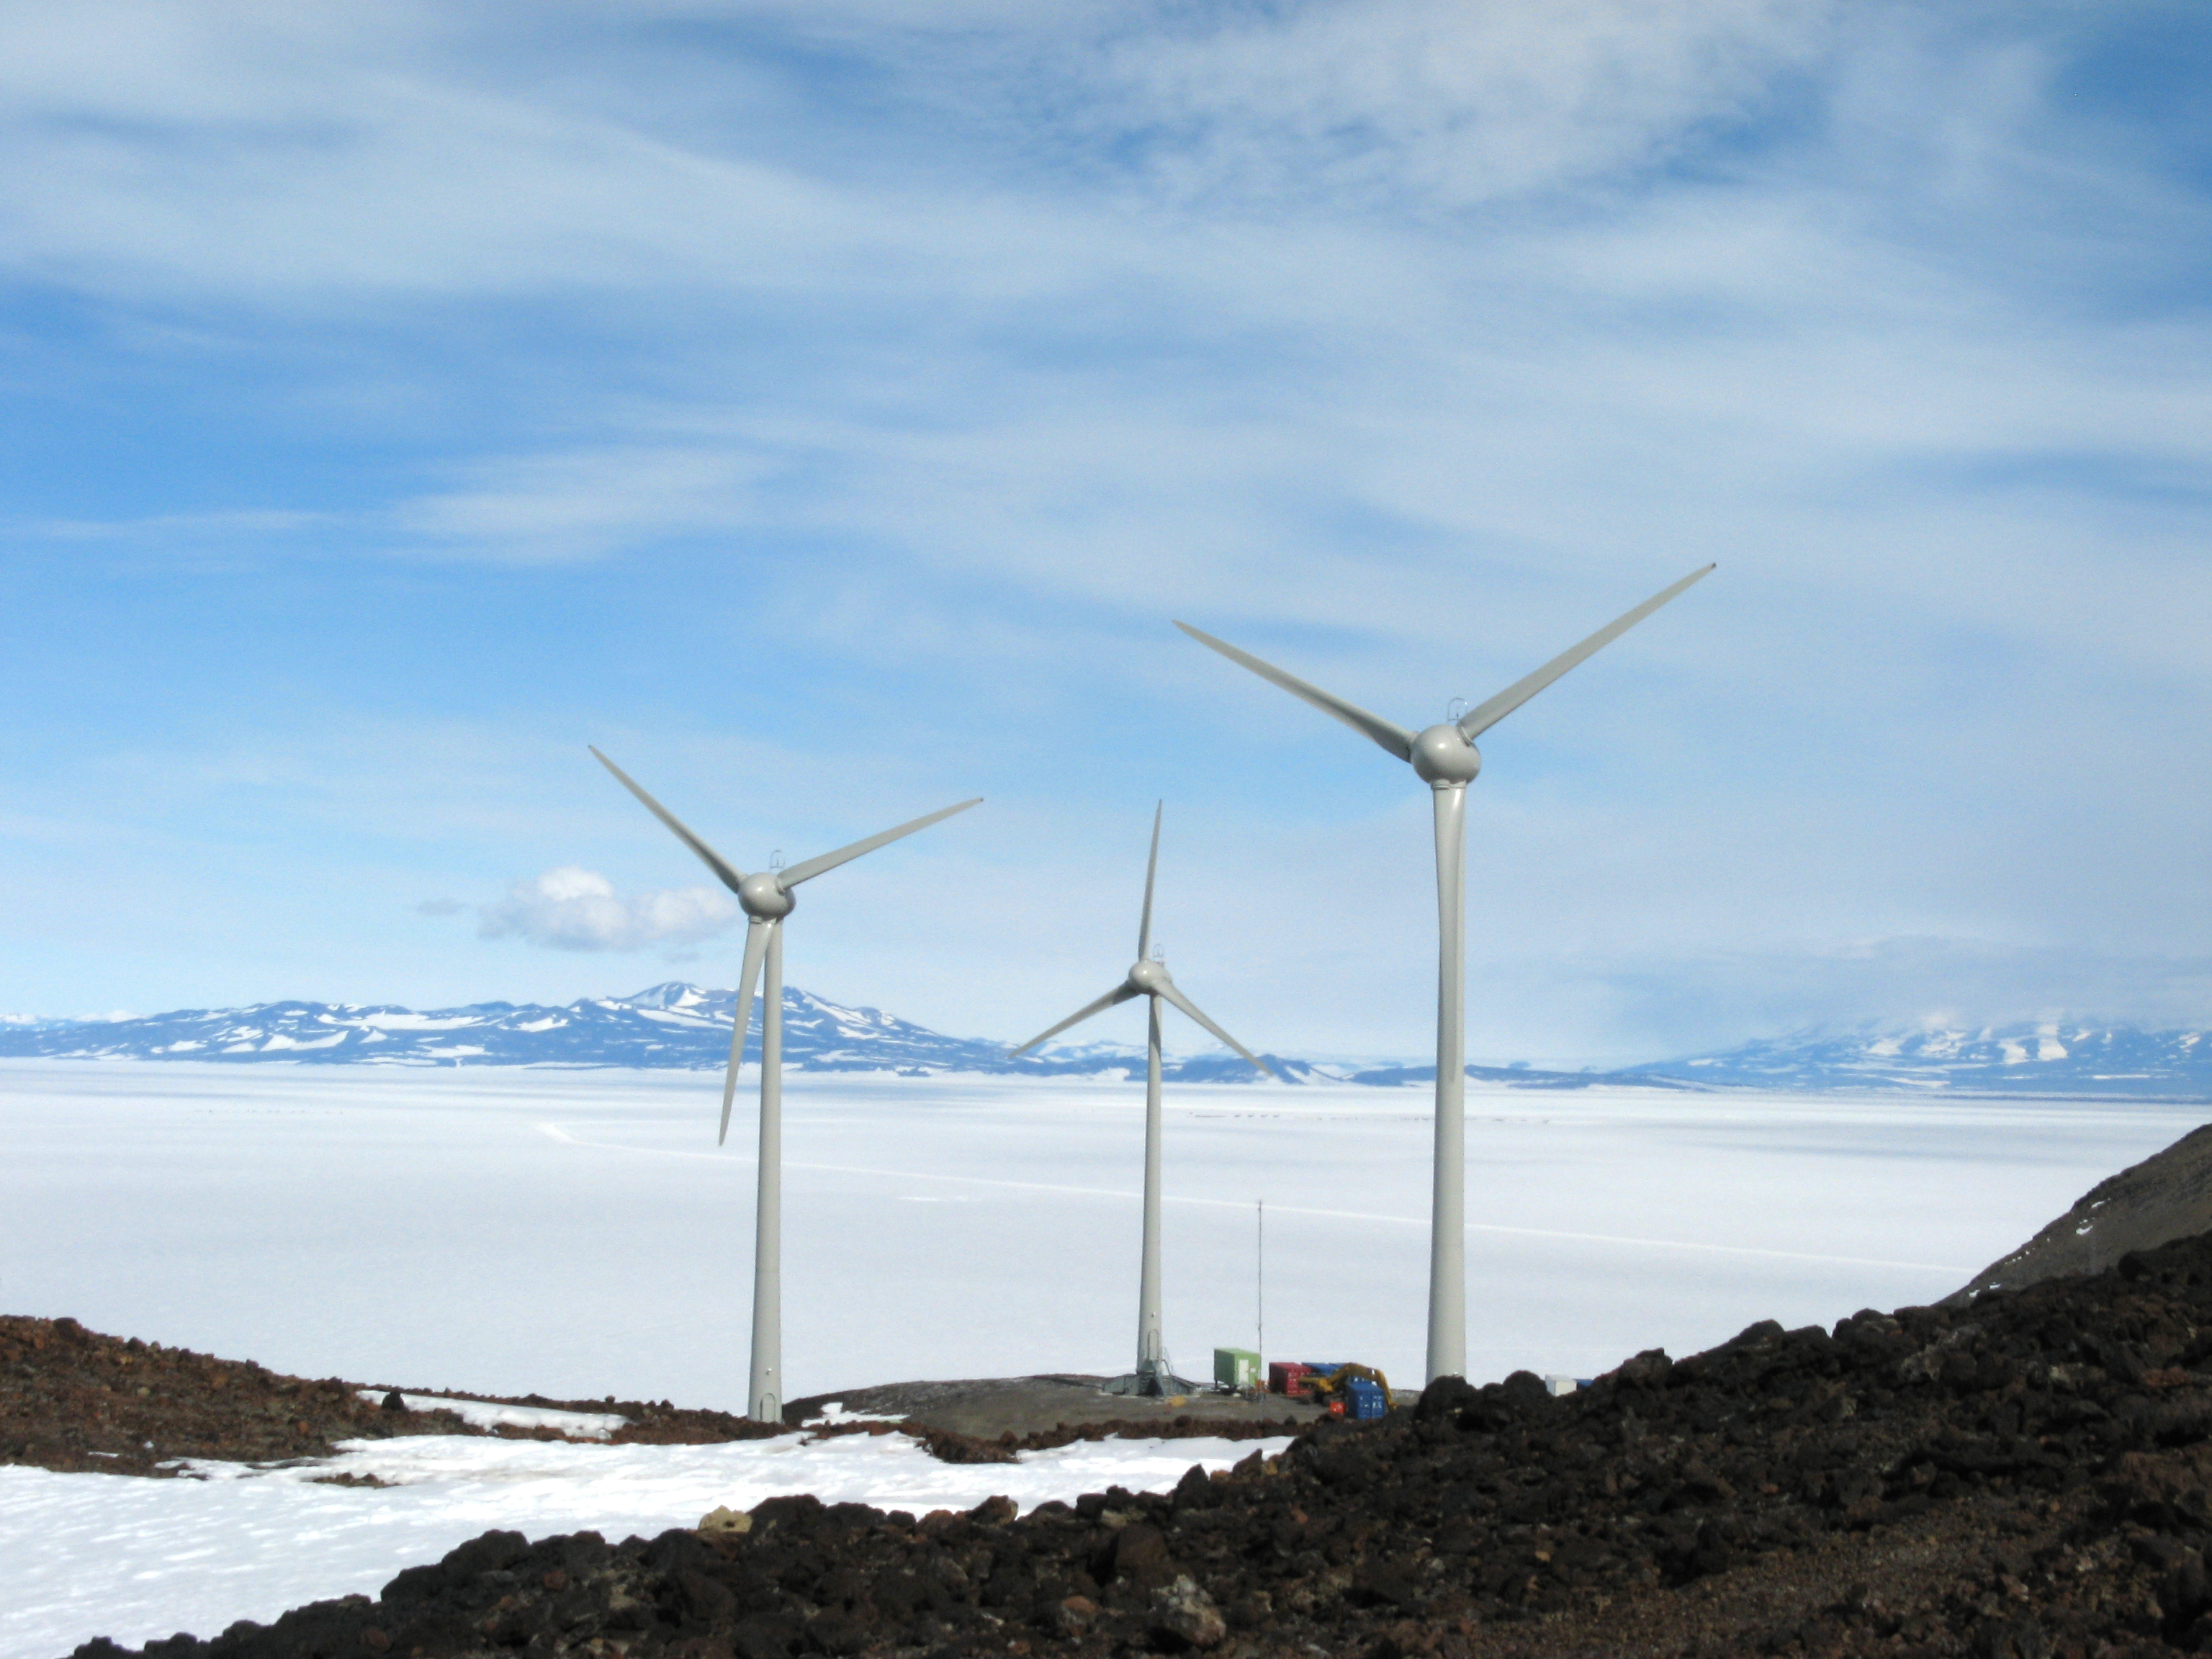 Wind turbines spin near icy place.